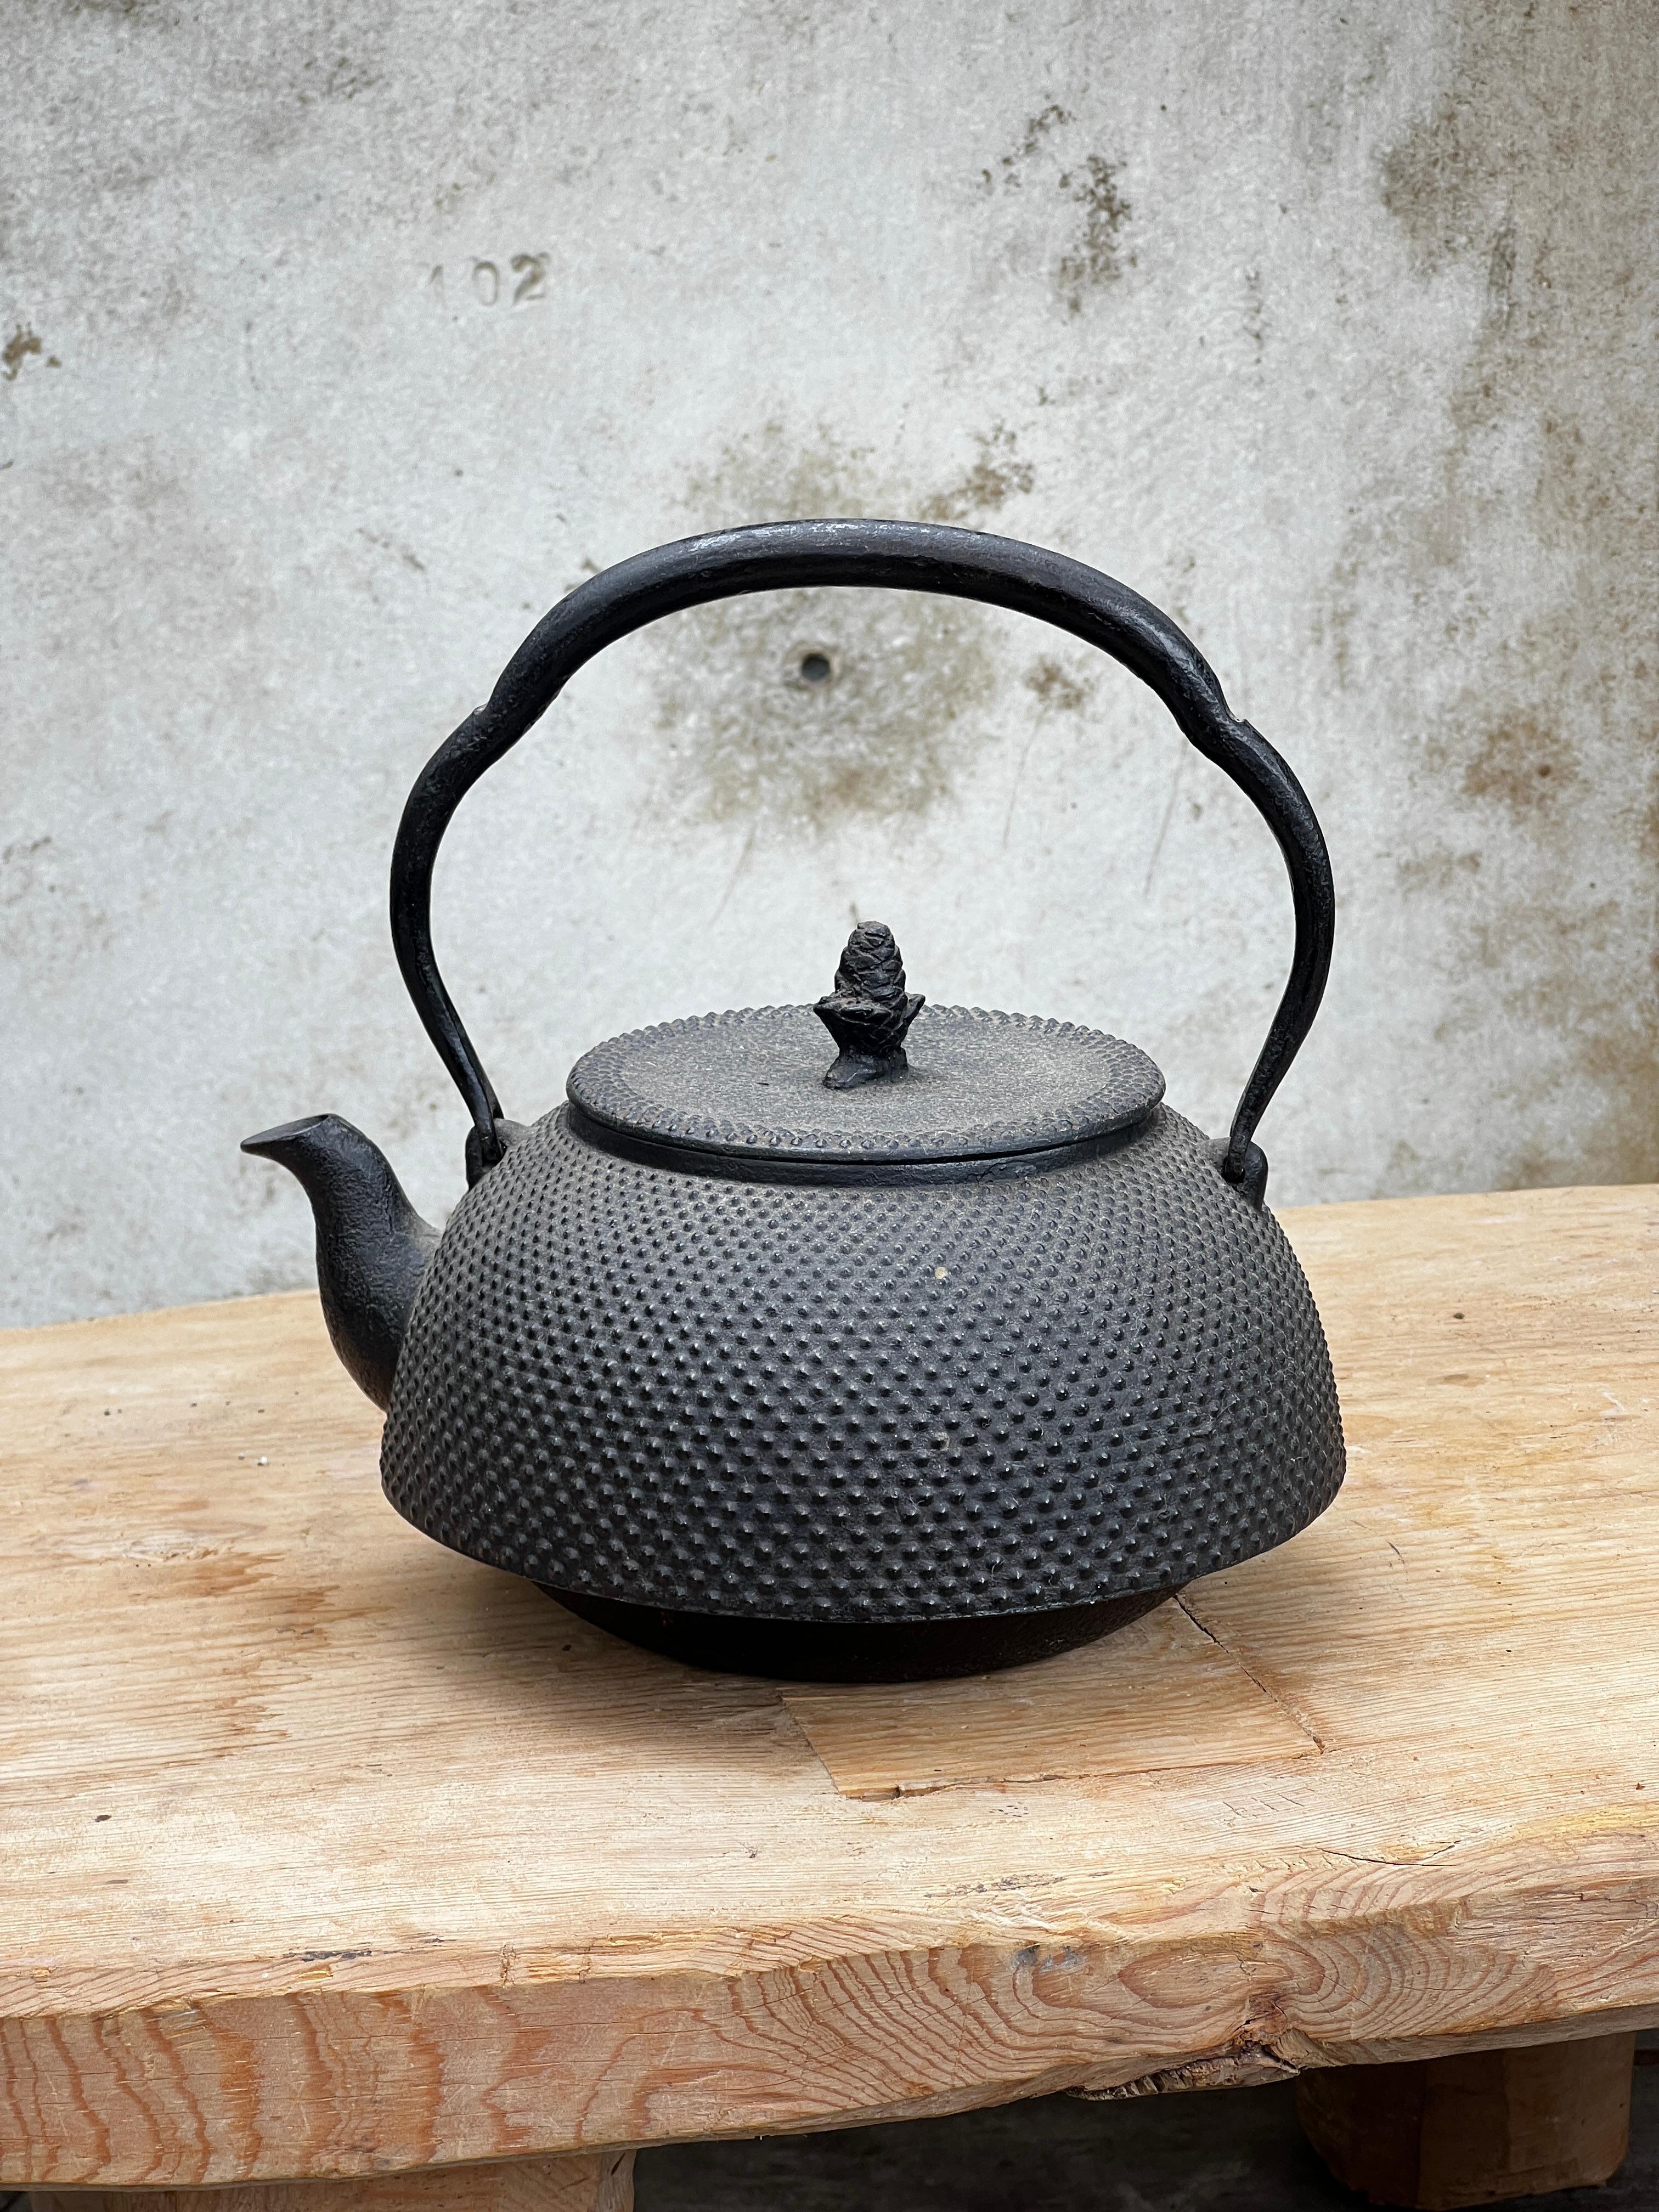 Adorned with a Textured Surface and a Gracefully Arched Handle, This Japanese Teapot Served the Purpose of Boiling Water for Customary Tea Ceremonies. Identified as a Tetsubin, Its Cast-Iron Composition is Believed to Enhance Water Quality,